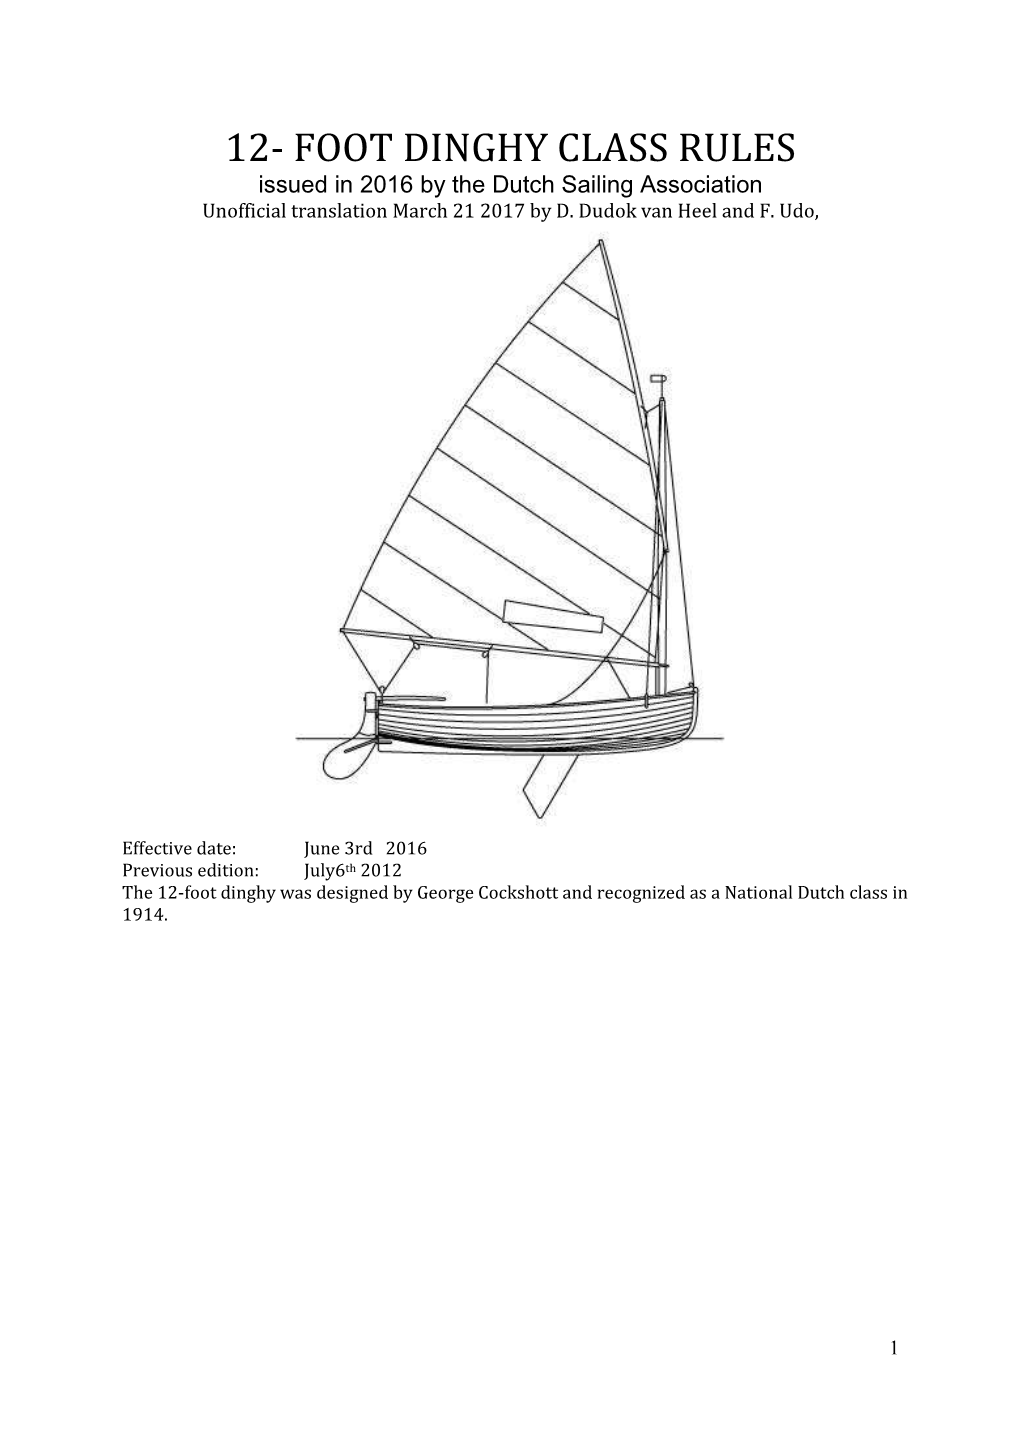 FOOT DINGHY CLASS RULES Issued in 2016 by the Dutch Sailing Association Unofficial Translation March 21 2017 by D